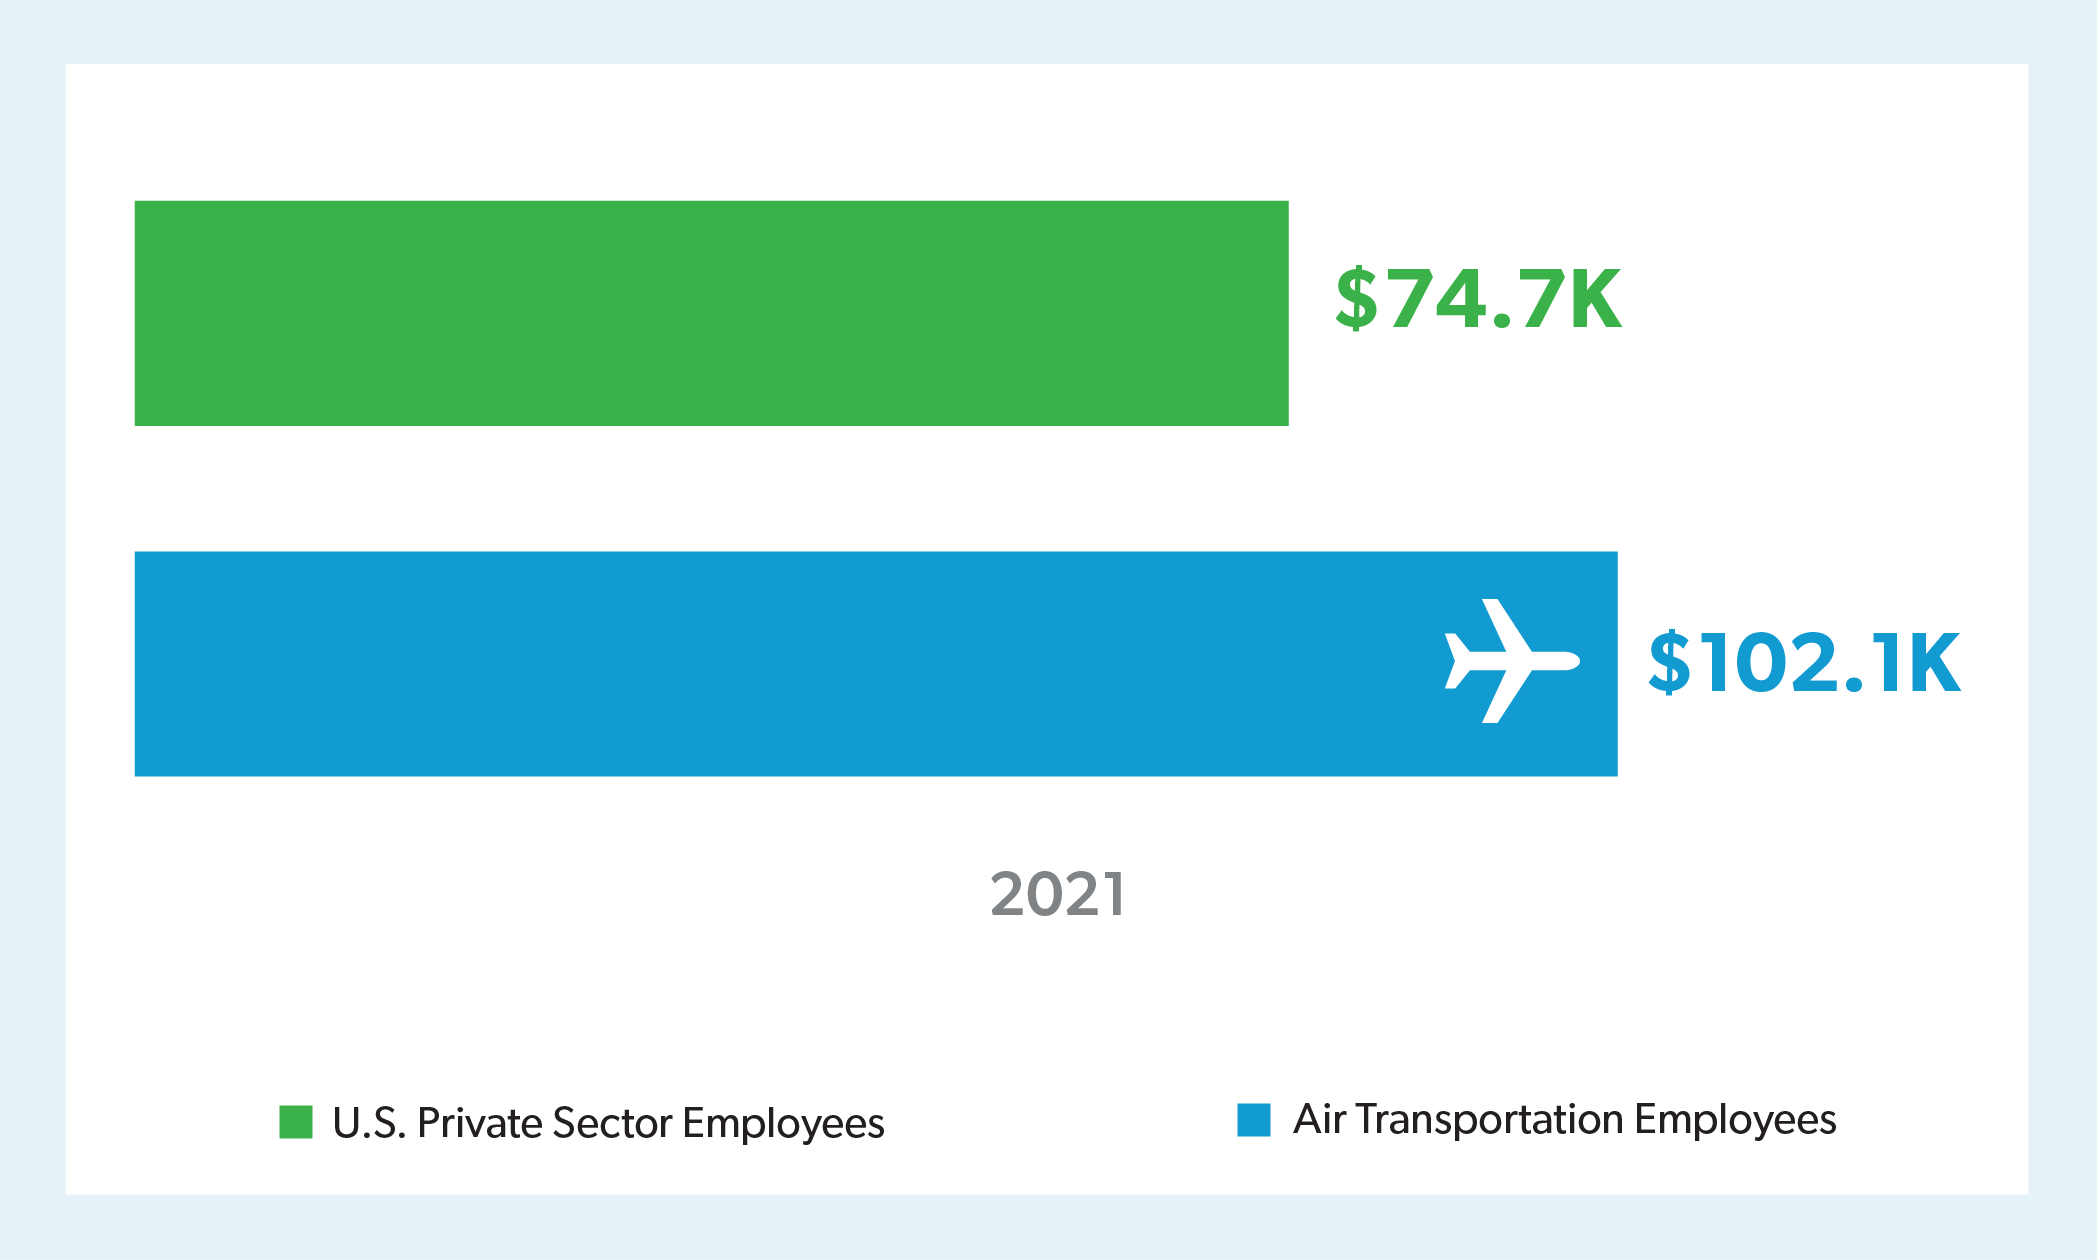 In 2021, Air Transportation Employees Earned Wages 37% Higher than the Average Private Sector Employee